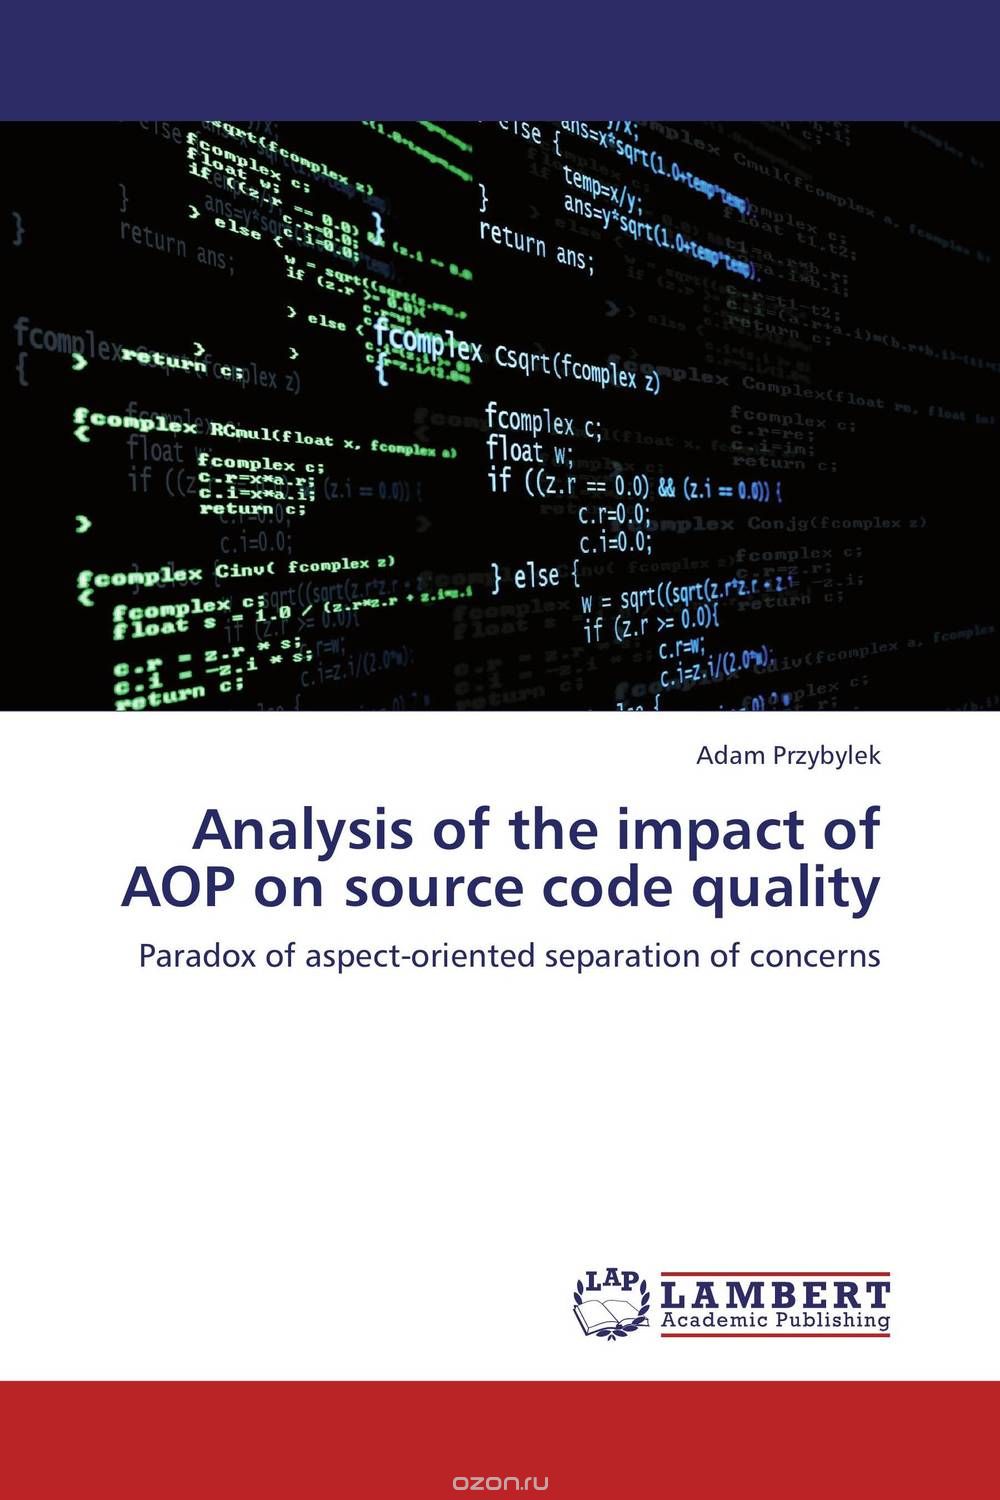 Analysis of the impact of AOP on source code quality, Adam Przybylek